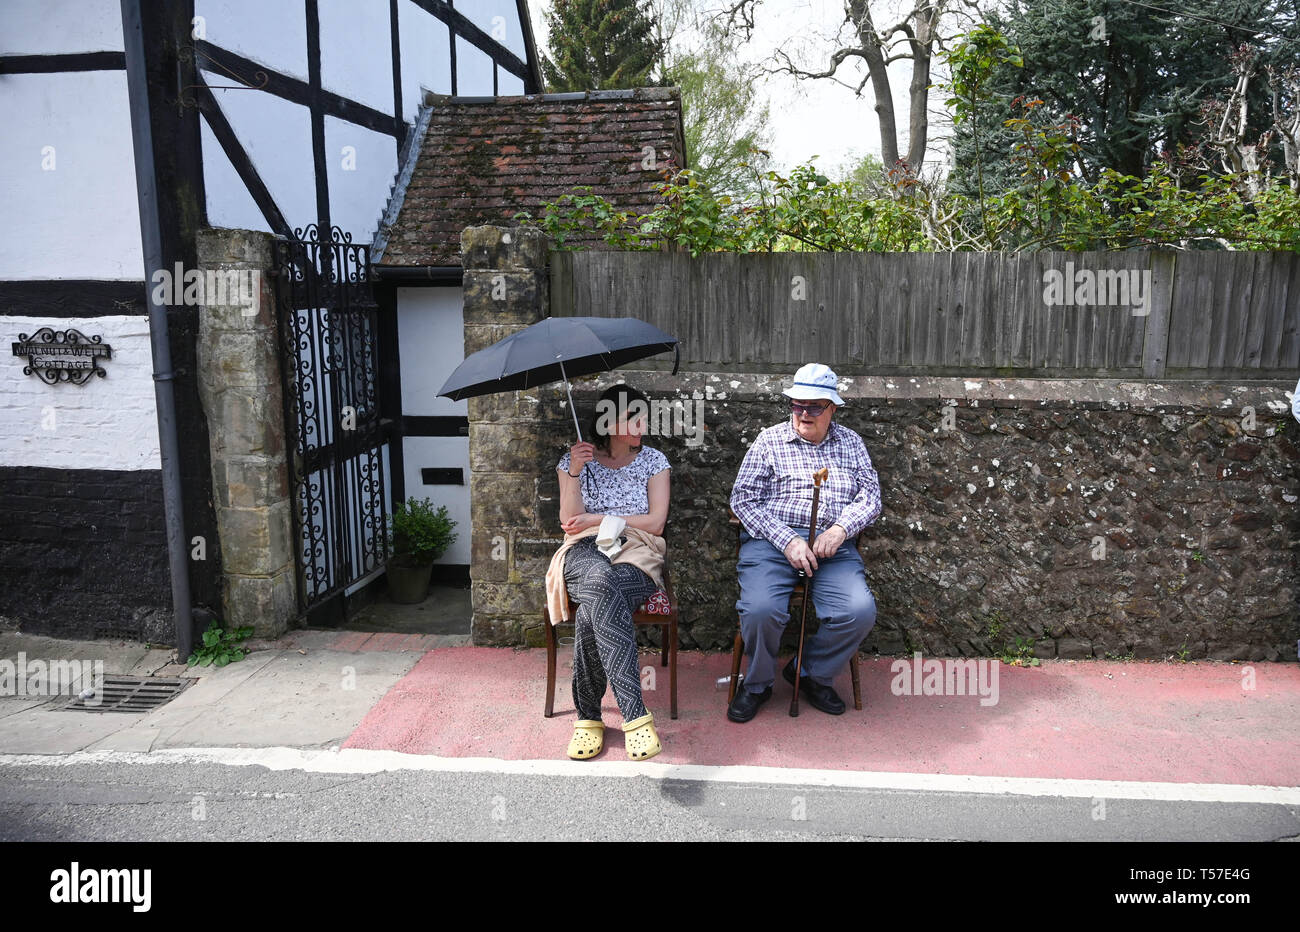 Bolney Sussex, UK. 22nd Apr, 2019. Spetcators stay cool in the shade at the annual Bolney Pram Race in hot sunny weather . The annual races start and finish at the Eight Bells Pub in the village every Easter Bank Holiday Monday Credit: Simon Dack/Alamy Live News Stock Photo